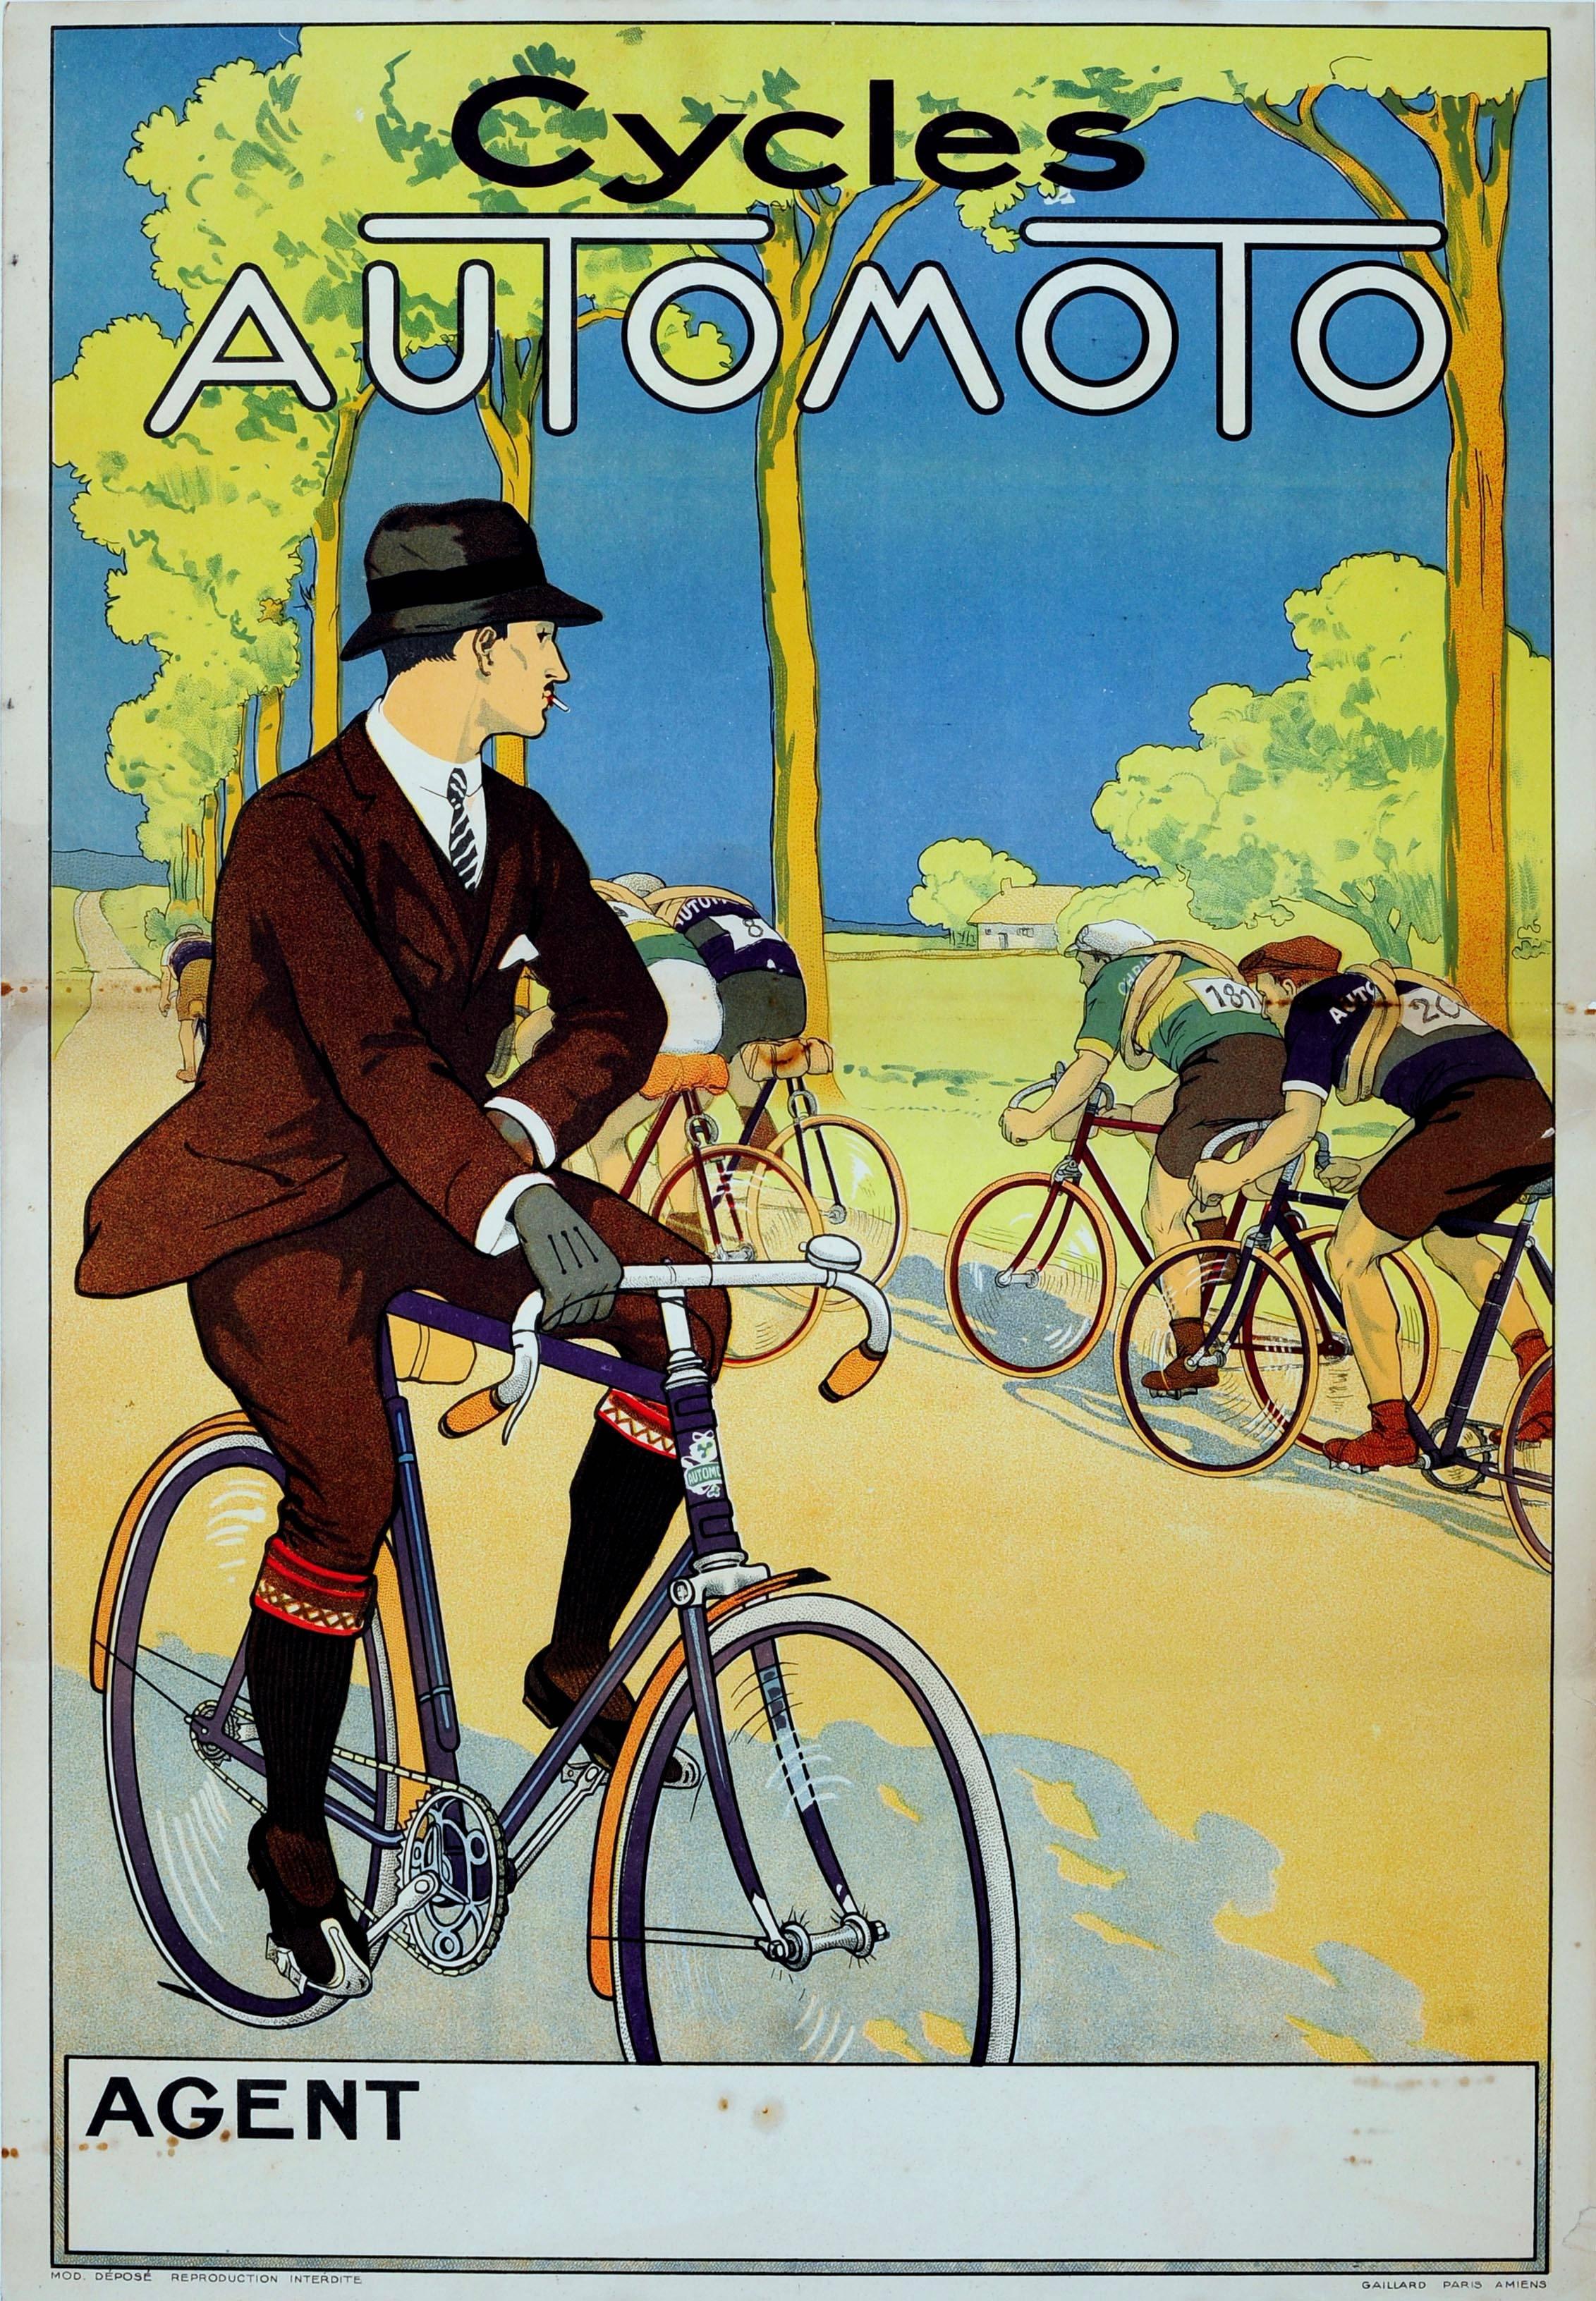 Unknown Print - Original Vintage 1920s Poster For Automoto Motos - Bicycles & Motorcycles France